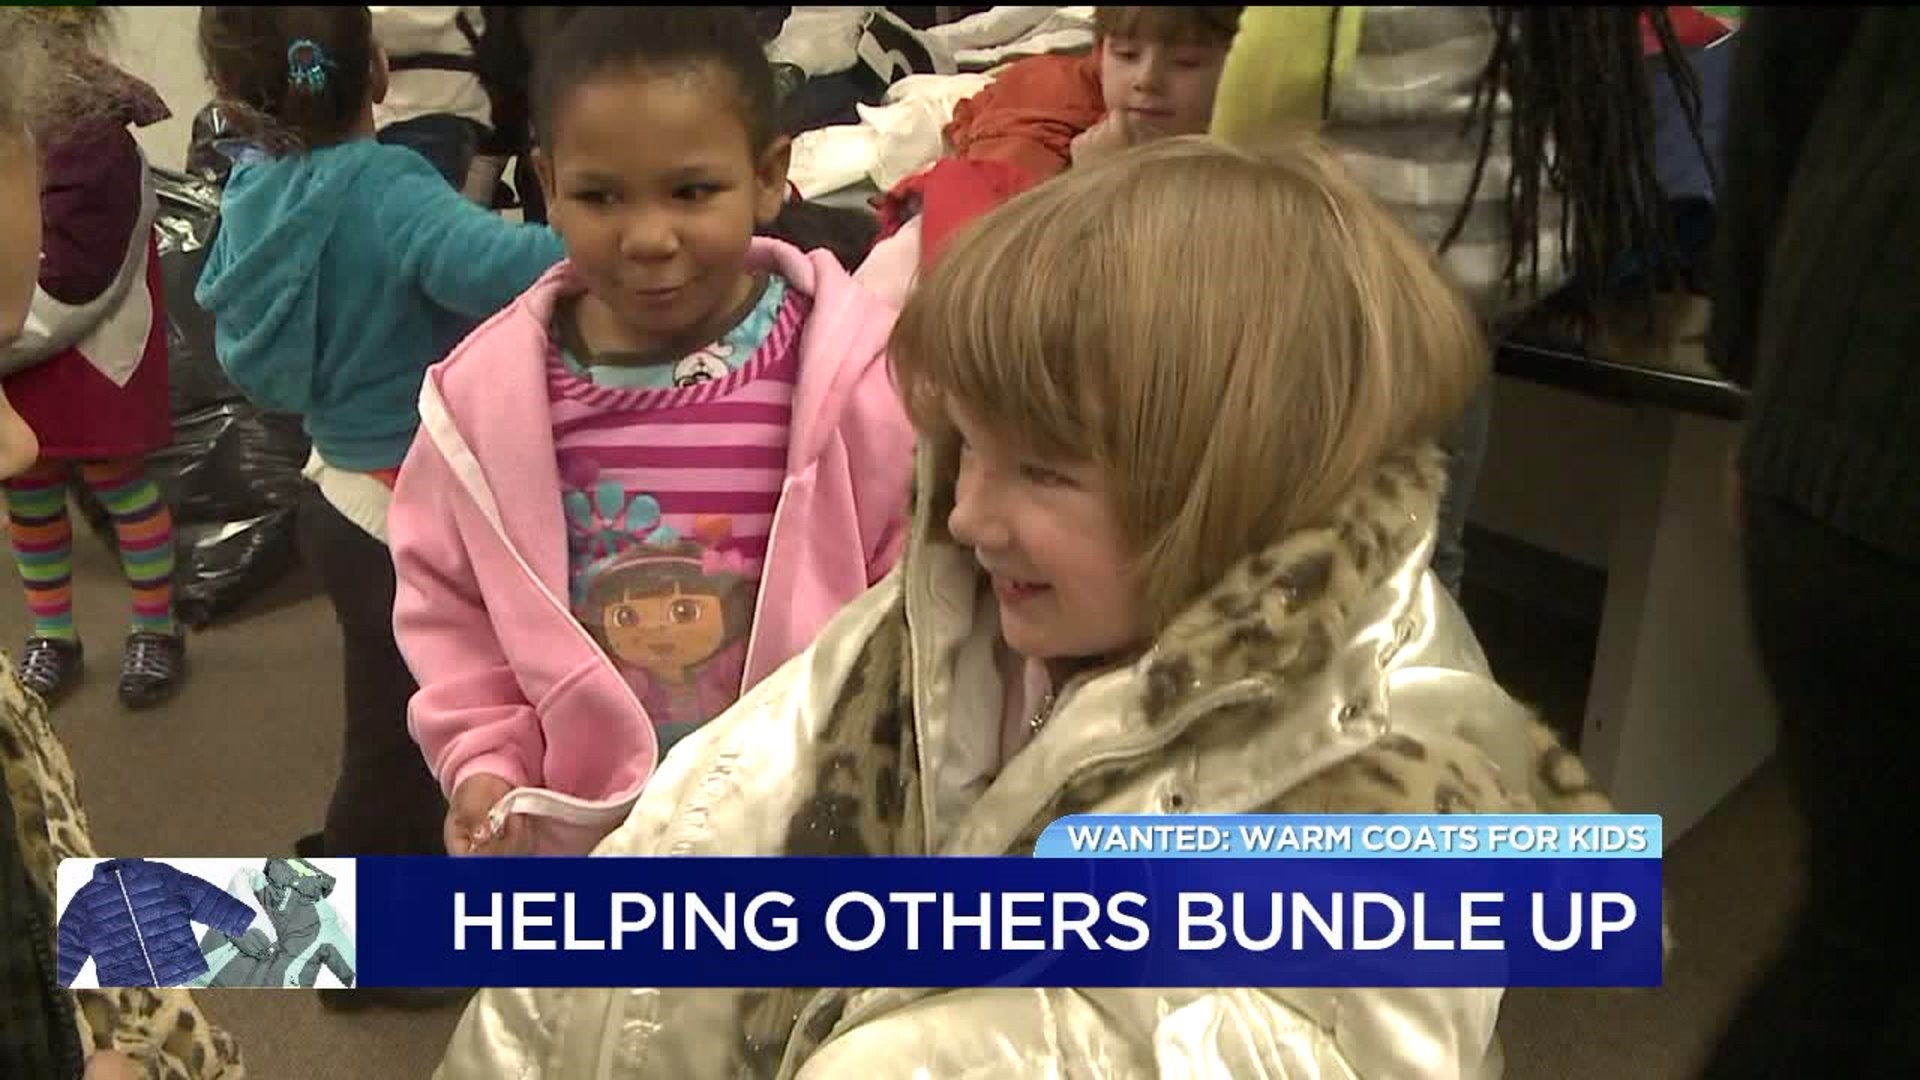 Coats for Kids: Project Launched to Help Families in Luzerne County